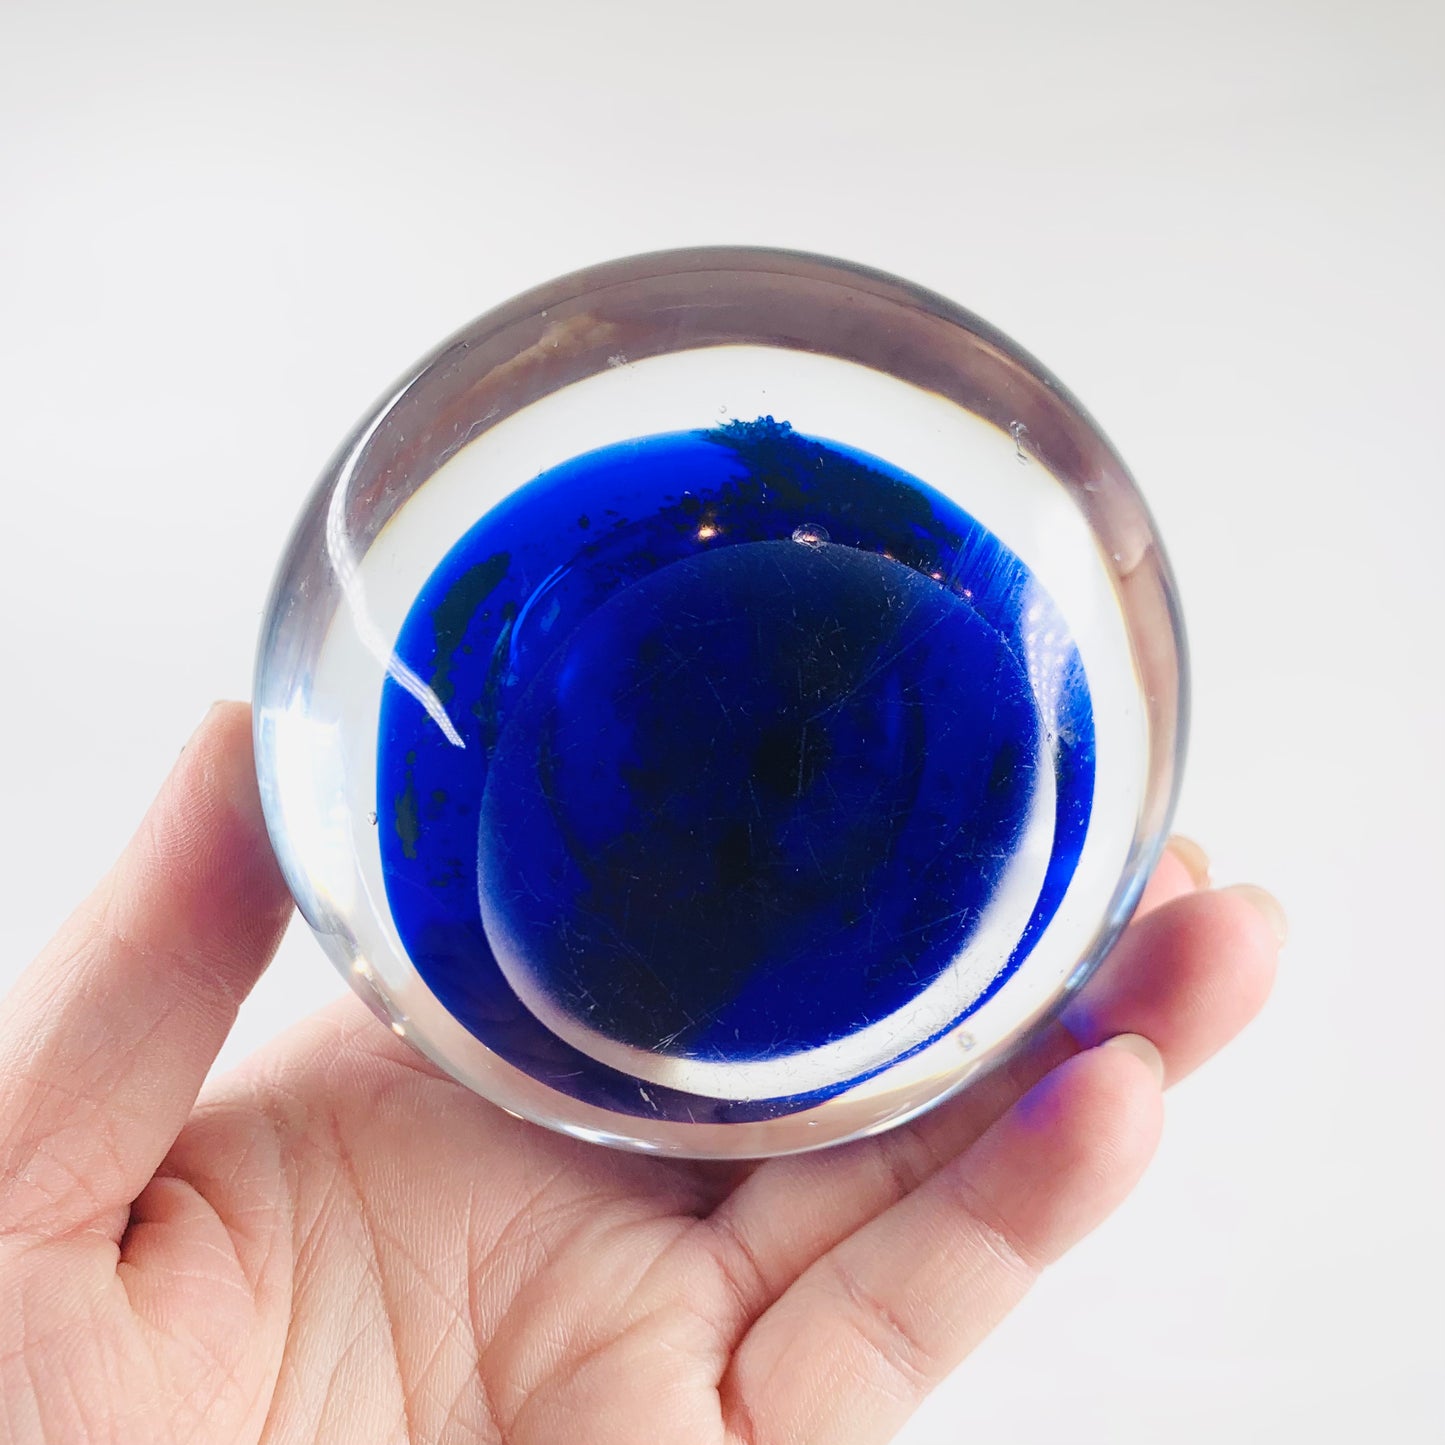 Space Age Murano cosmic glass paperweight